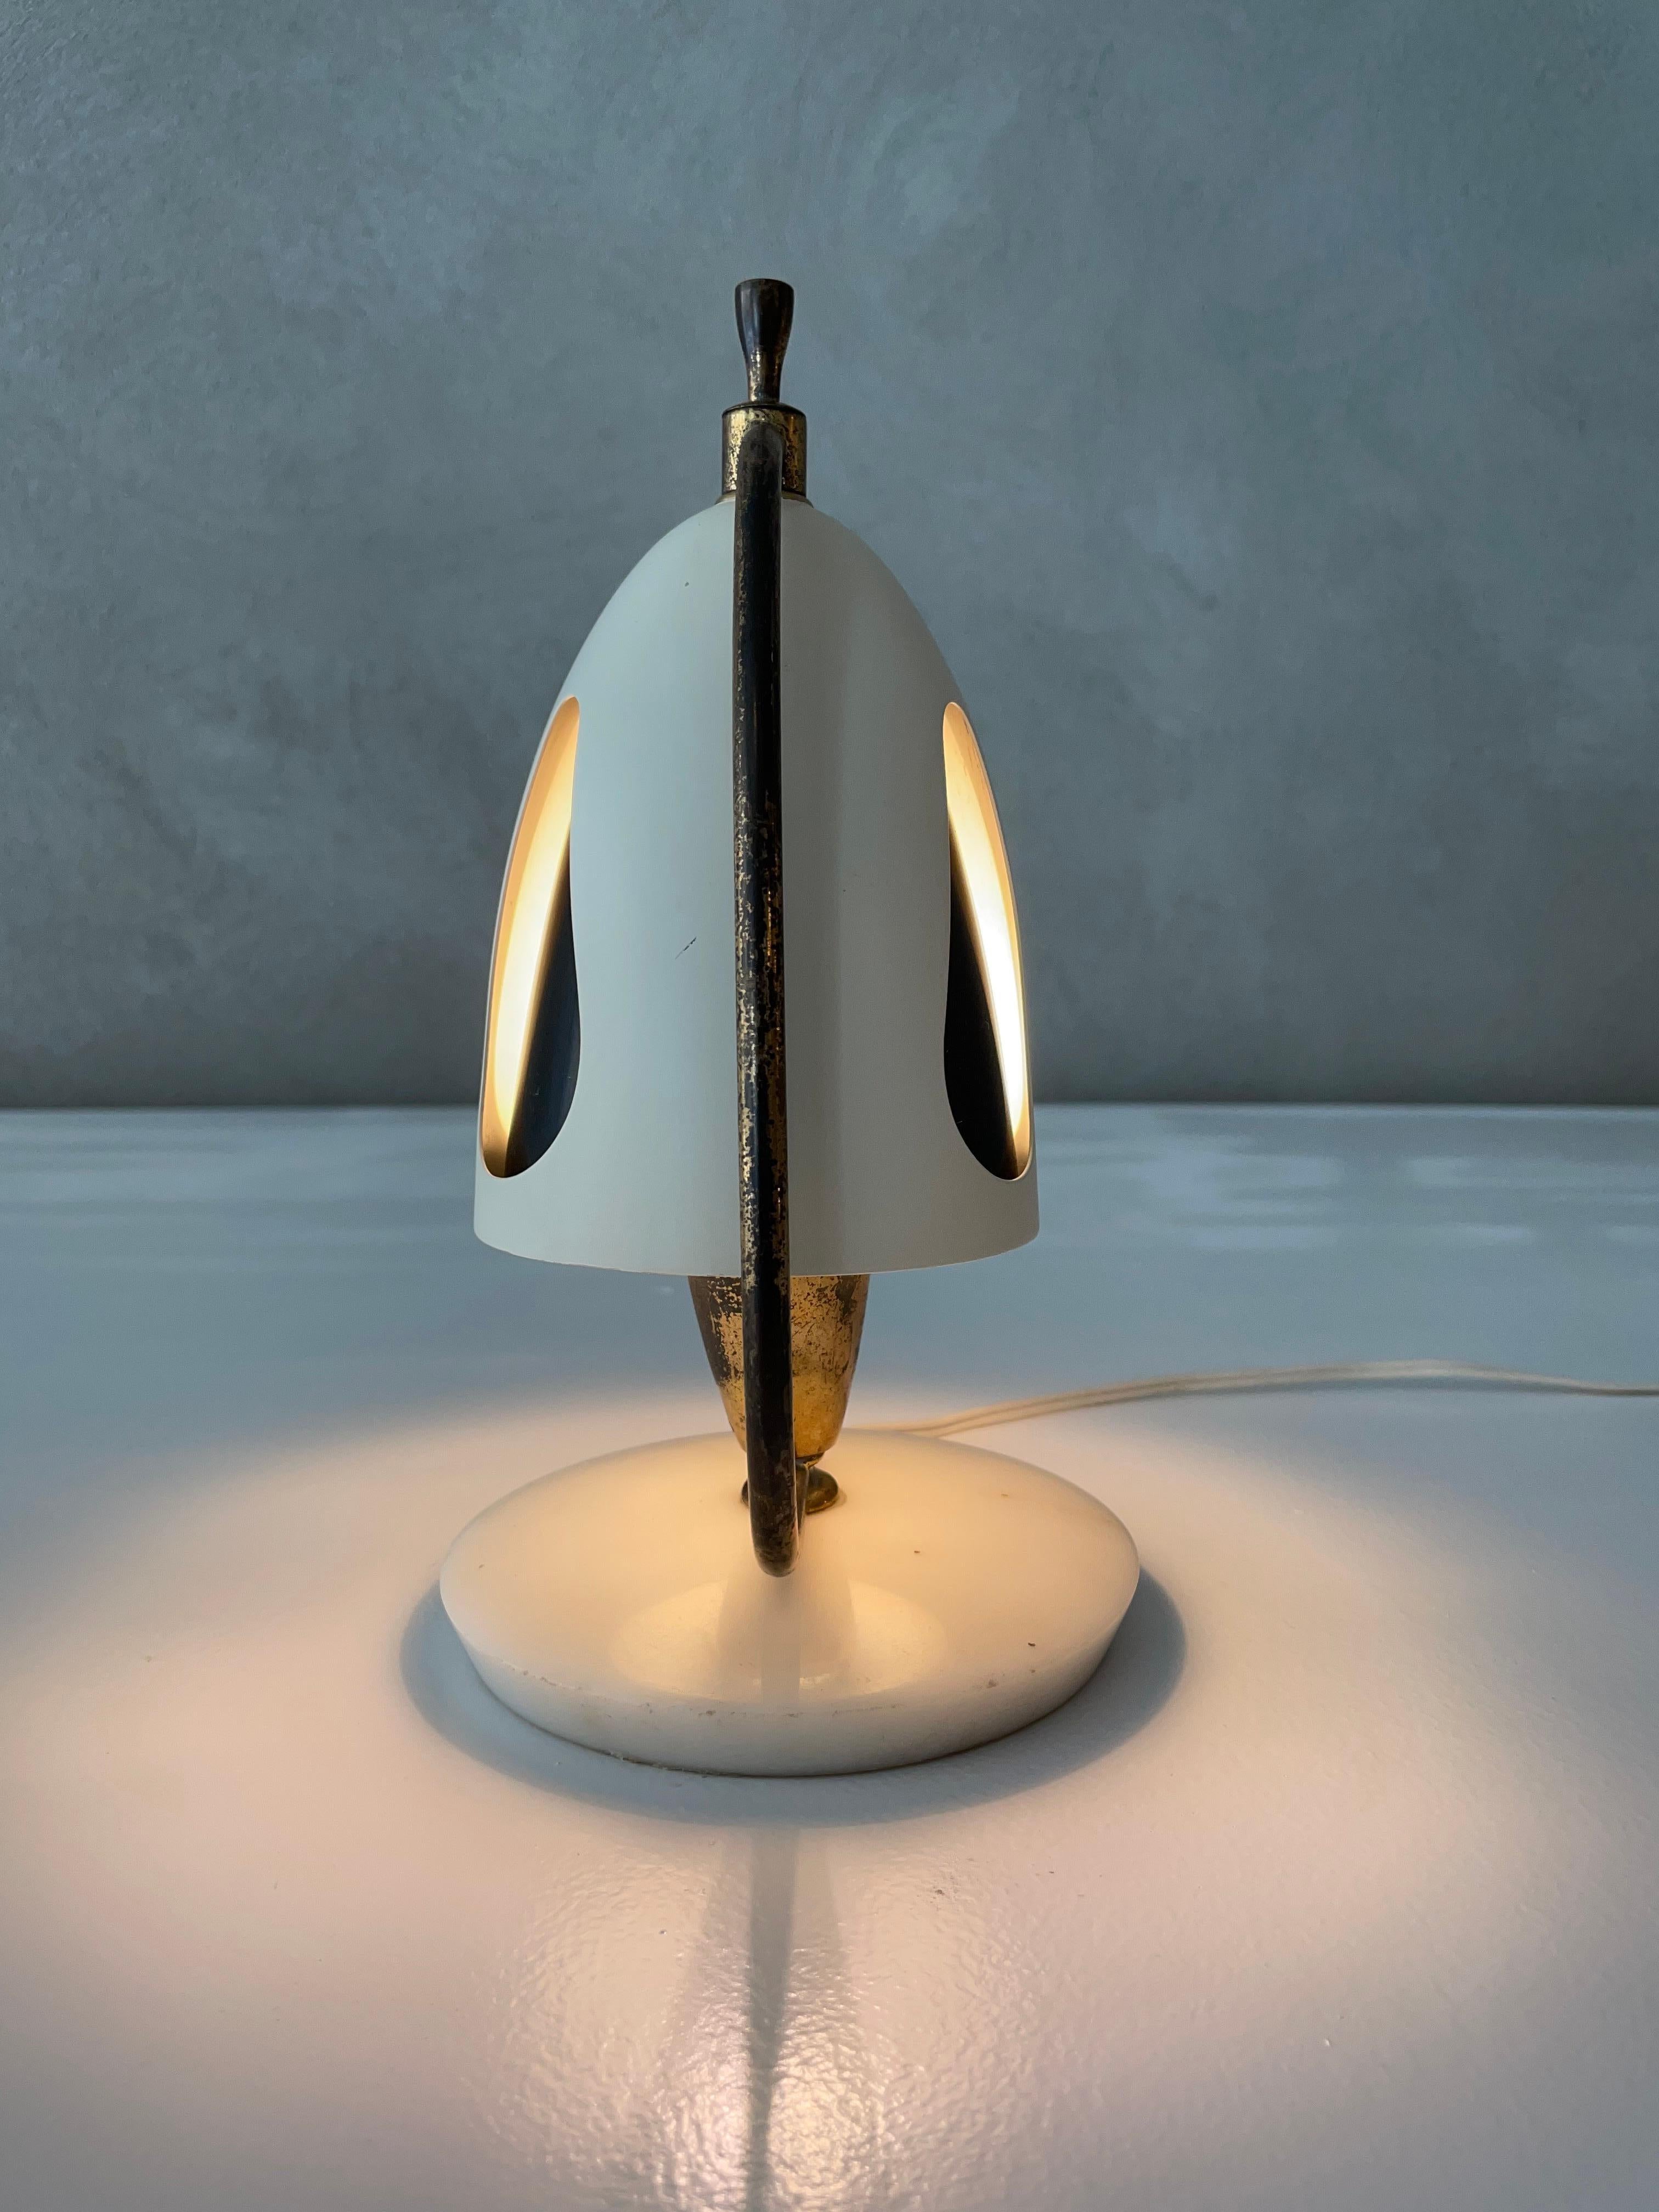 Mod. 12398 table lamp by Angelo Lelii
Manufactured by Arredoluce Monza Italy, 1952s.
Marble base, structure in brass and rotating diffuser mounted concentrically, so as to create a play of light
It's in original conditions.
Original manufacturer